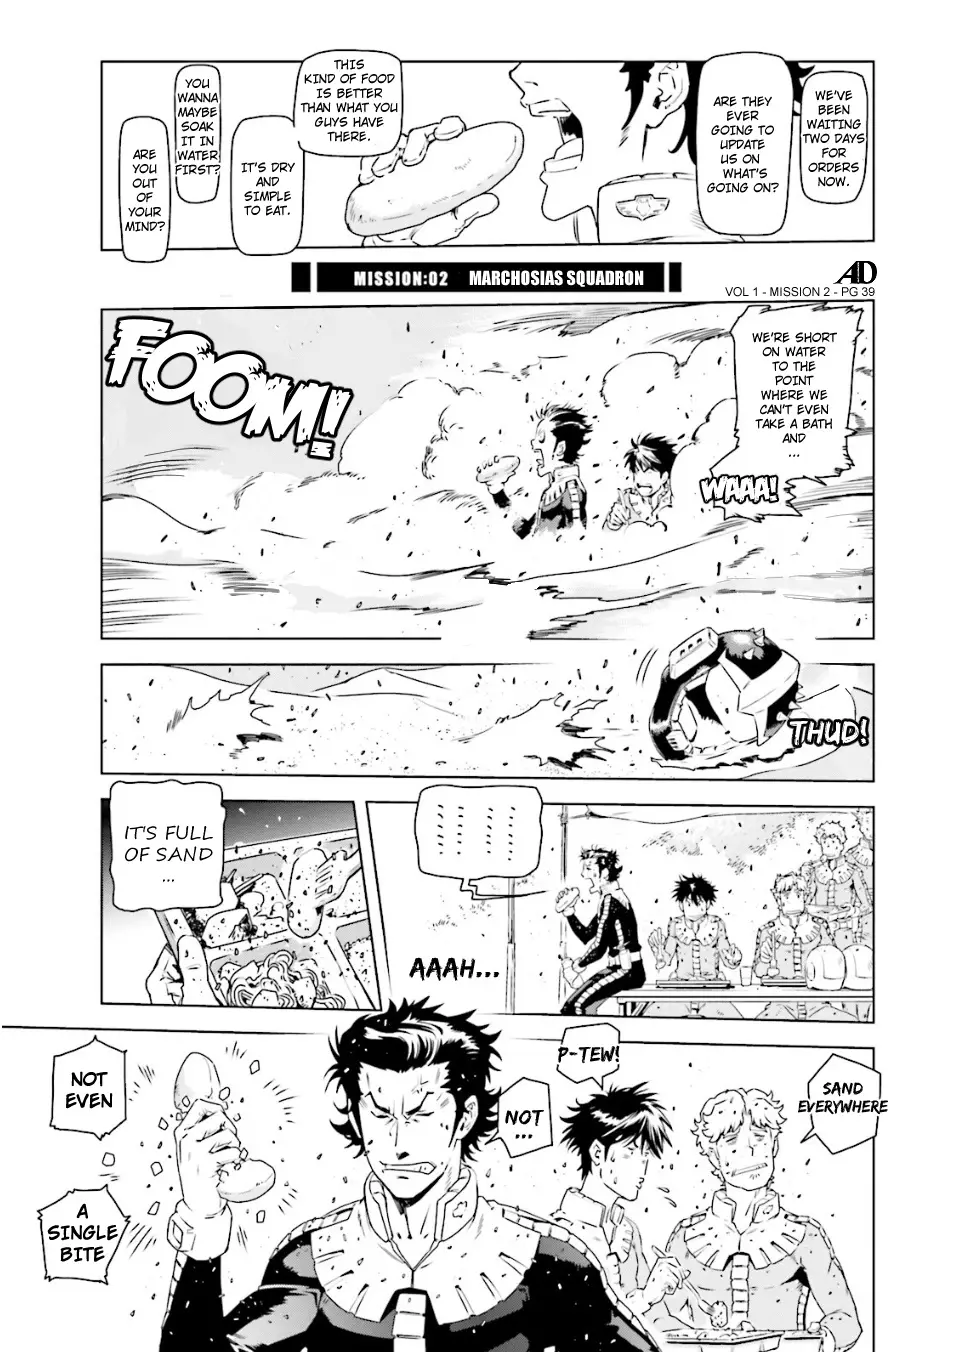 Mobile Suit Gundam Side Story - Missing Link - 2 page 1-f58a914e